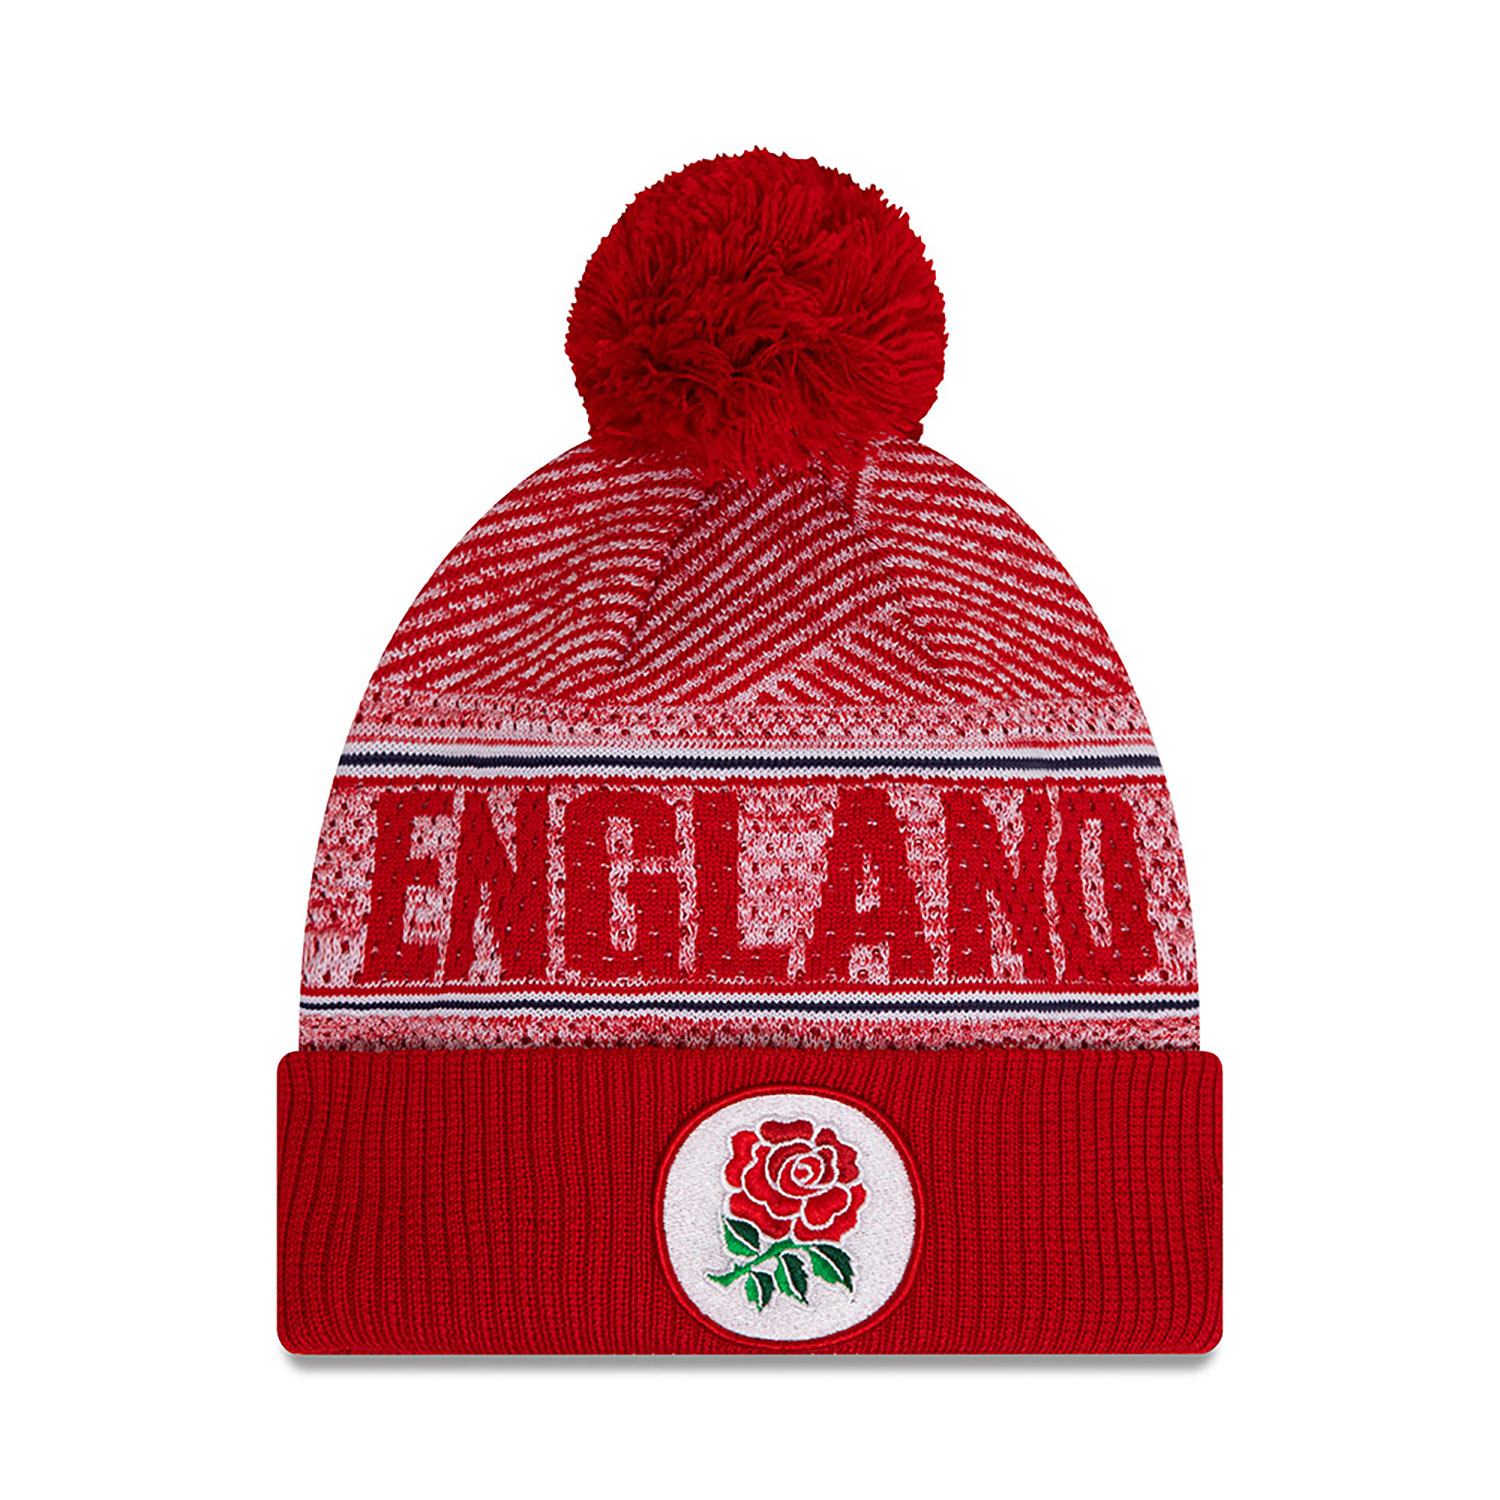 Rugby Football Union Engineered Wordmark Red Bobble Knit Beanie Hat